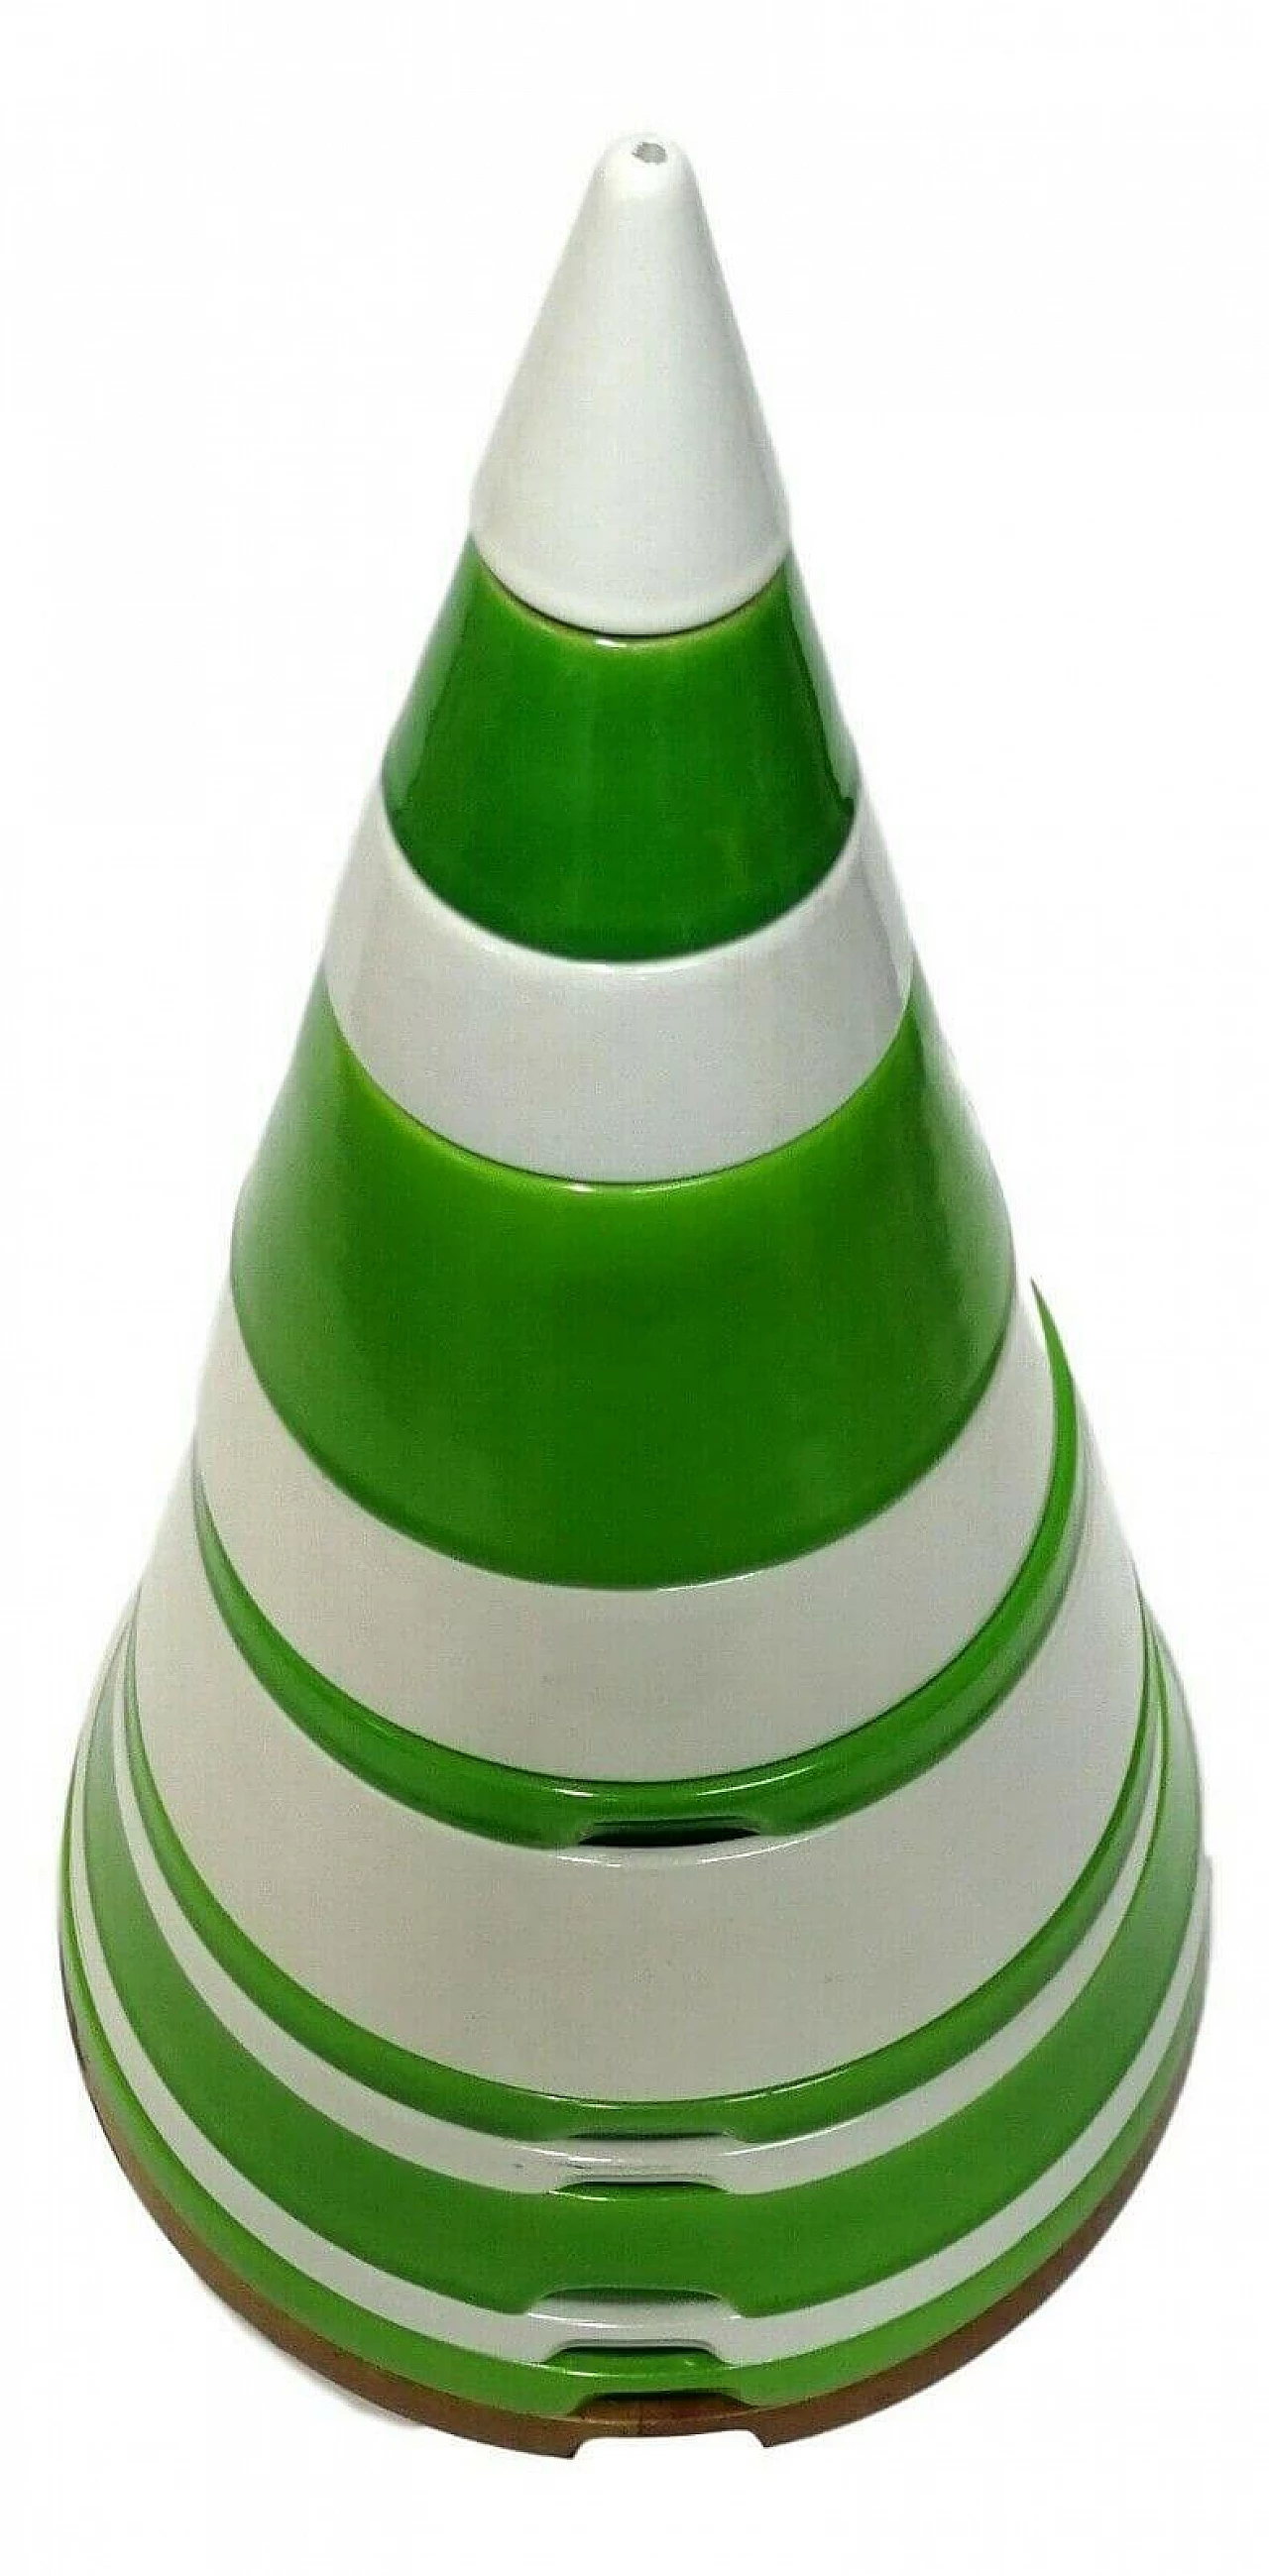 Ceramic tableware Cone designed by Ettore Sottsass for Pierre Cardin, produced by Franco Pozzi, 1969 1168080